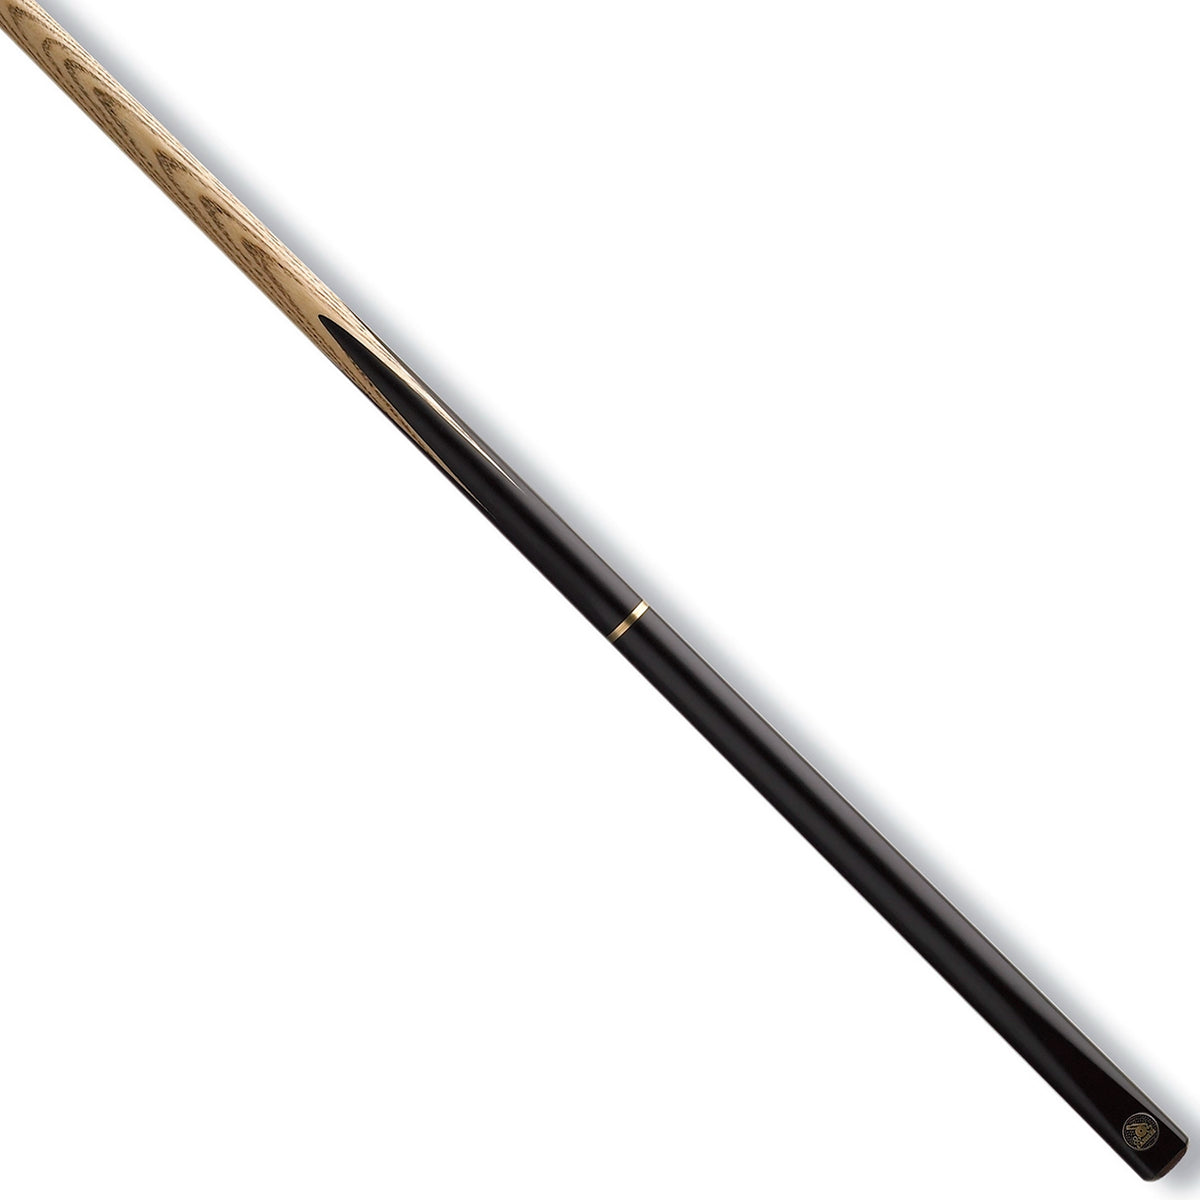 Cannon Tornado 3/4 Jointed Snooker Cue. On angle view